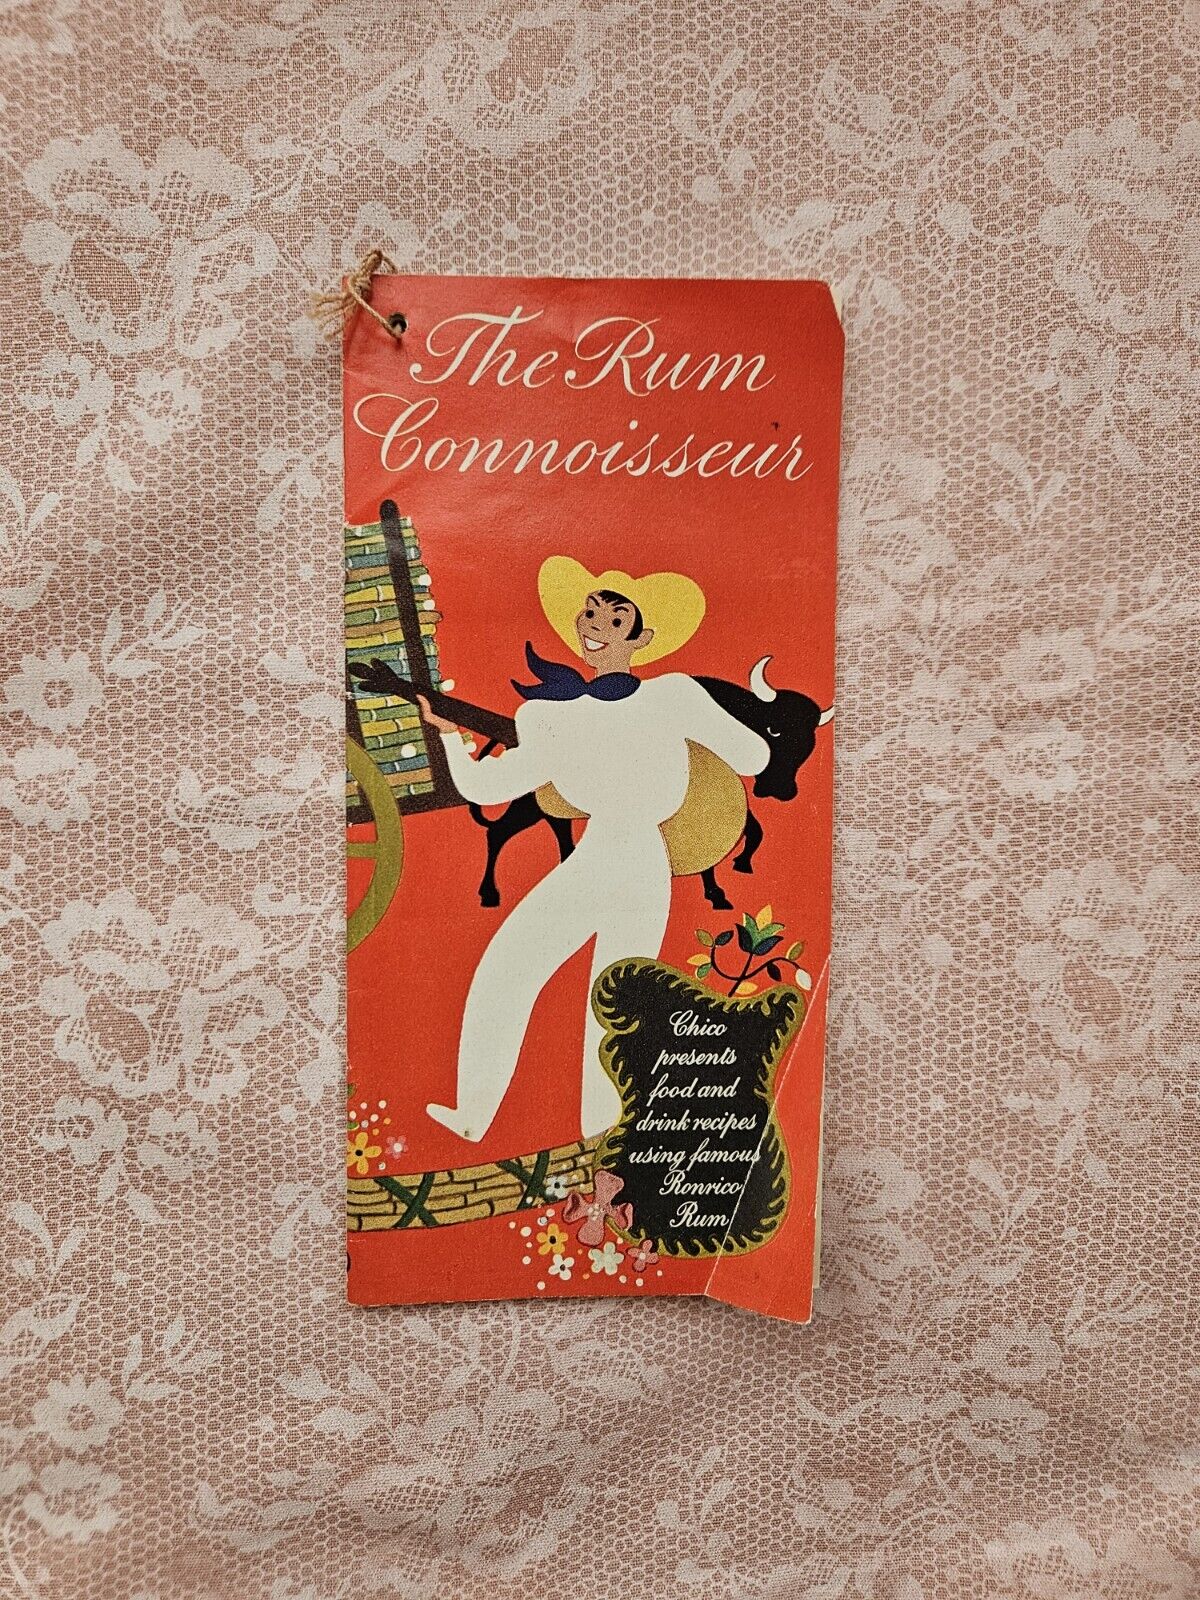 VTG 1944 The Rum Connoisseur Food and Drink Recipes Ronrico Rum